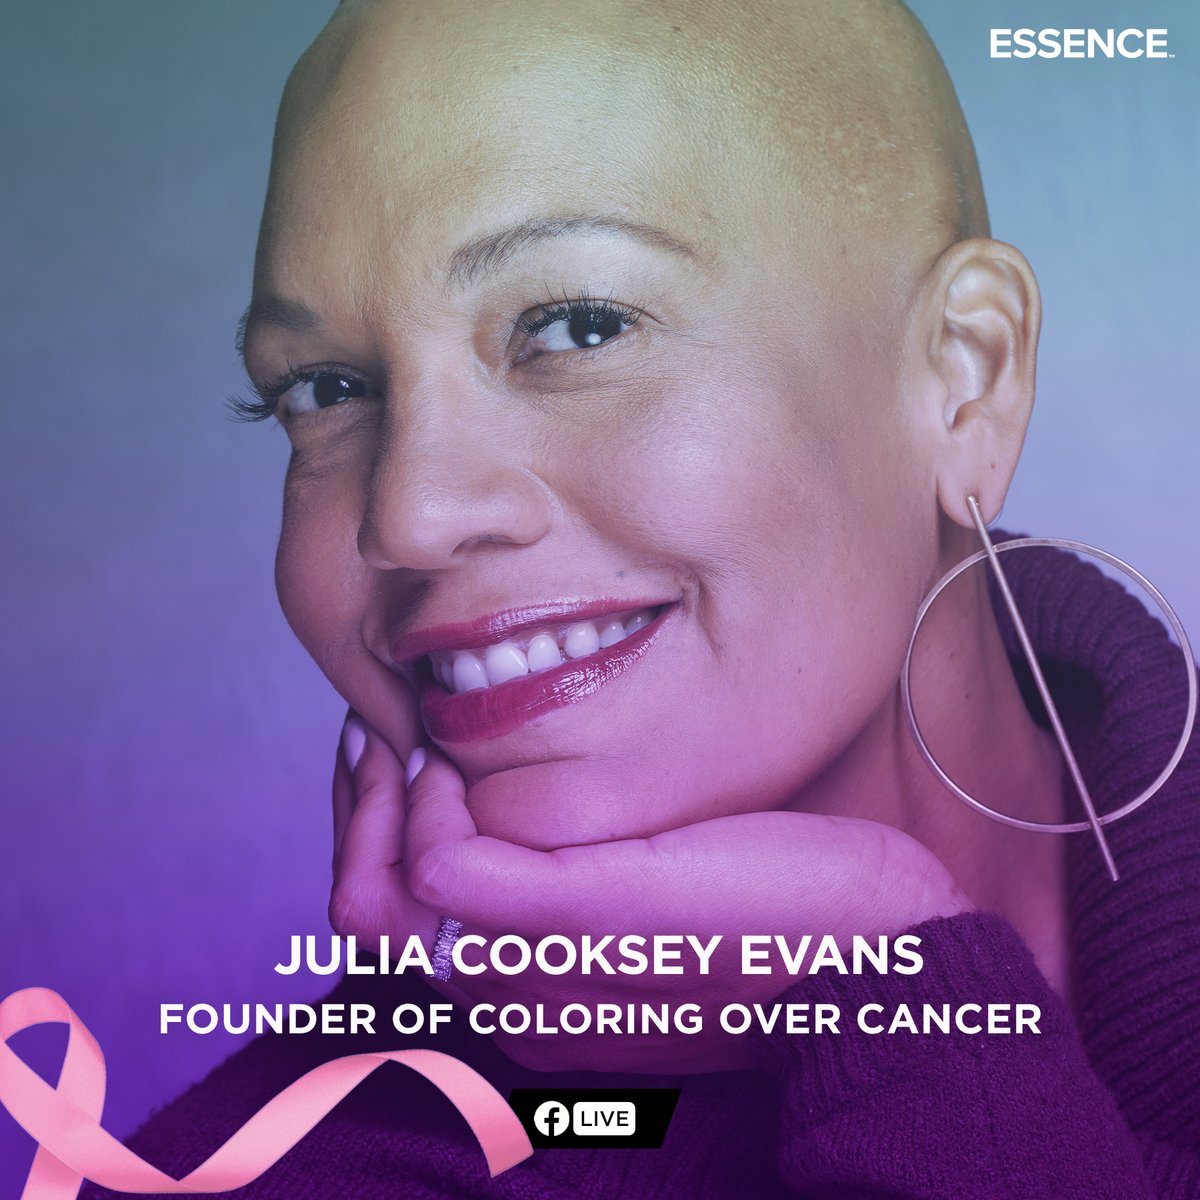 Join #ESSENCE for a special Wellness Check on breast cancer awareness with survivors and medical professionals. The conversation starts TODAY at NOON (EST).